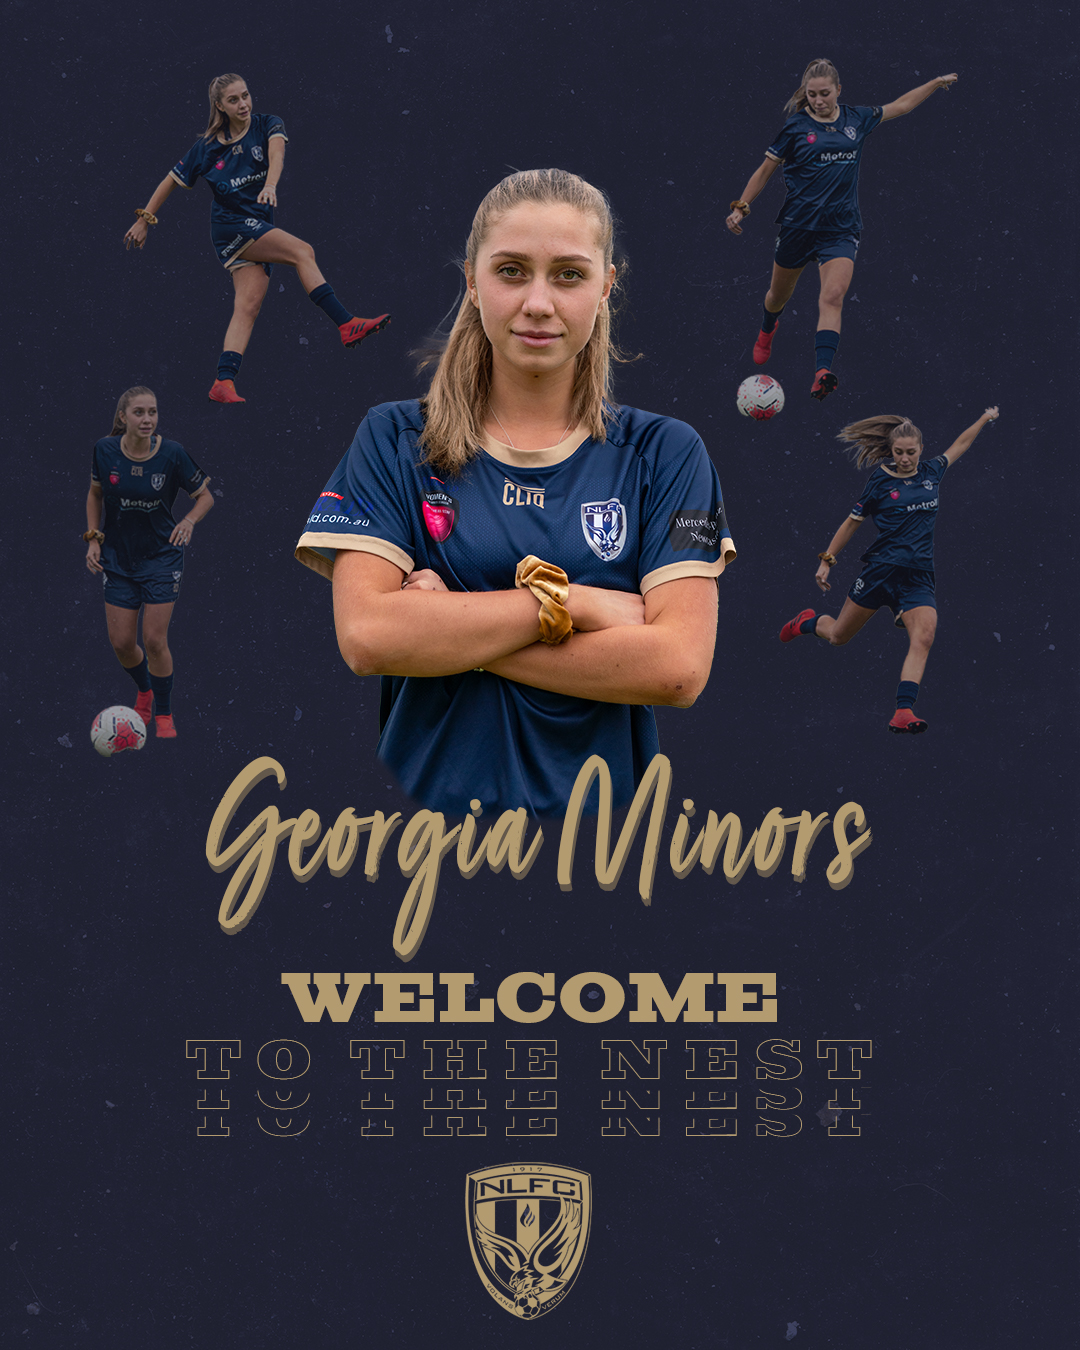 A promotional image of Newcastle footballer Georgia Minors.